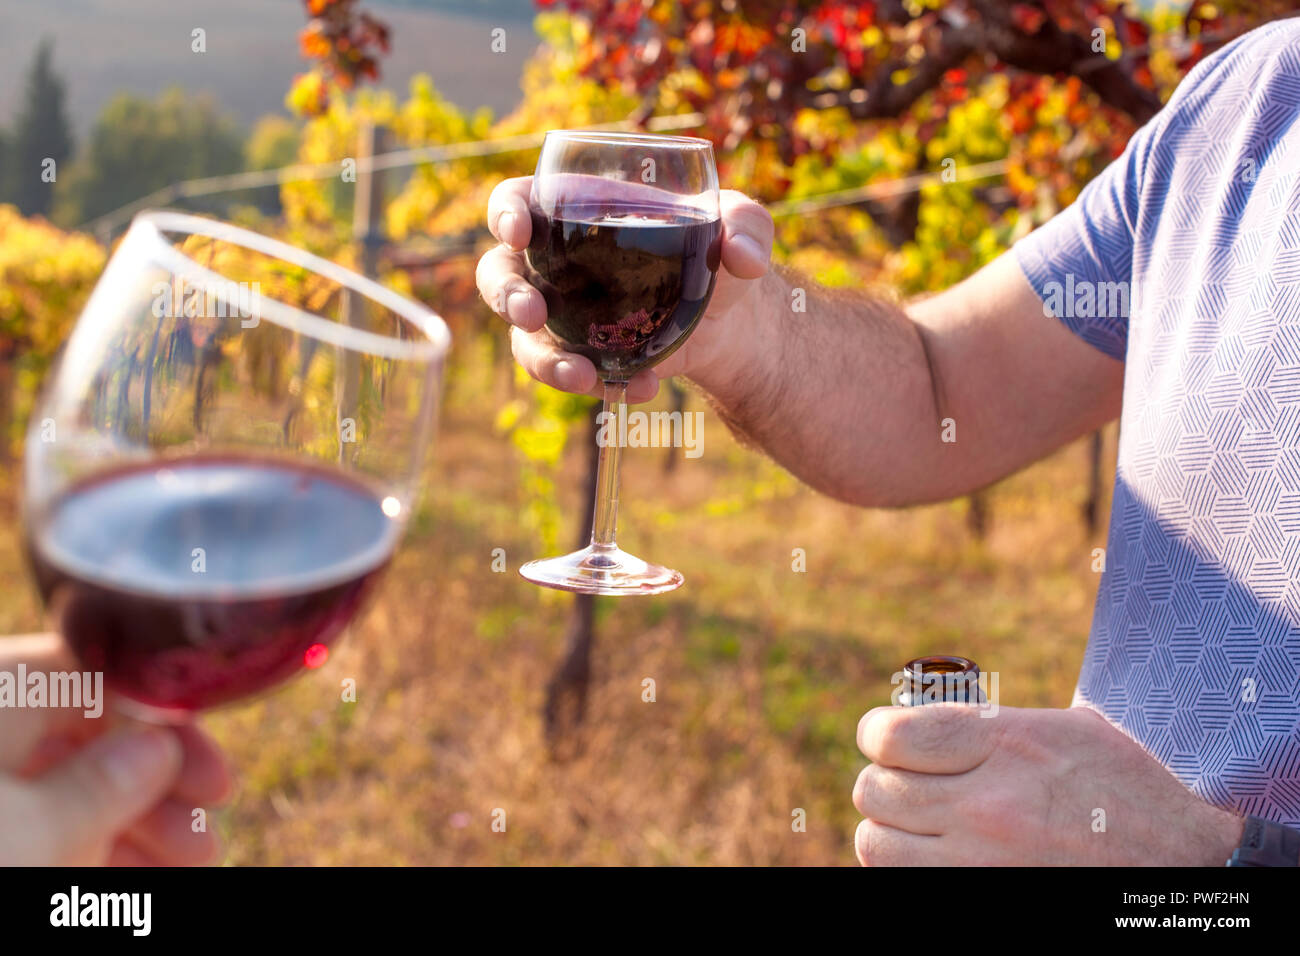 9 Of The Most Popular Red Wines (& Why They're So Great)